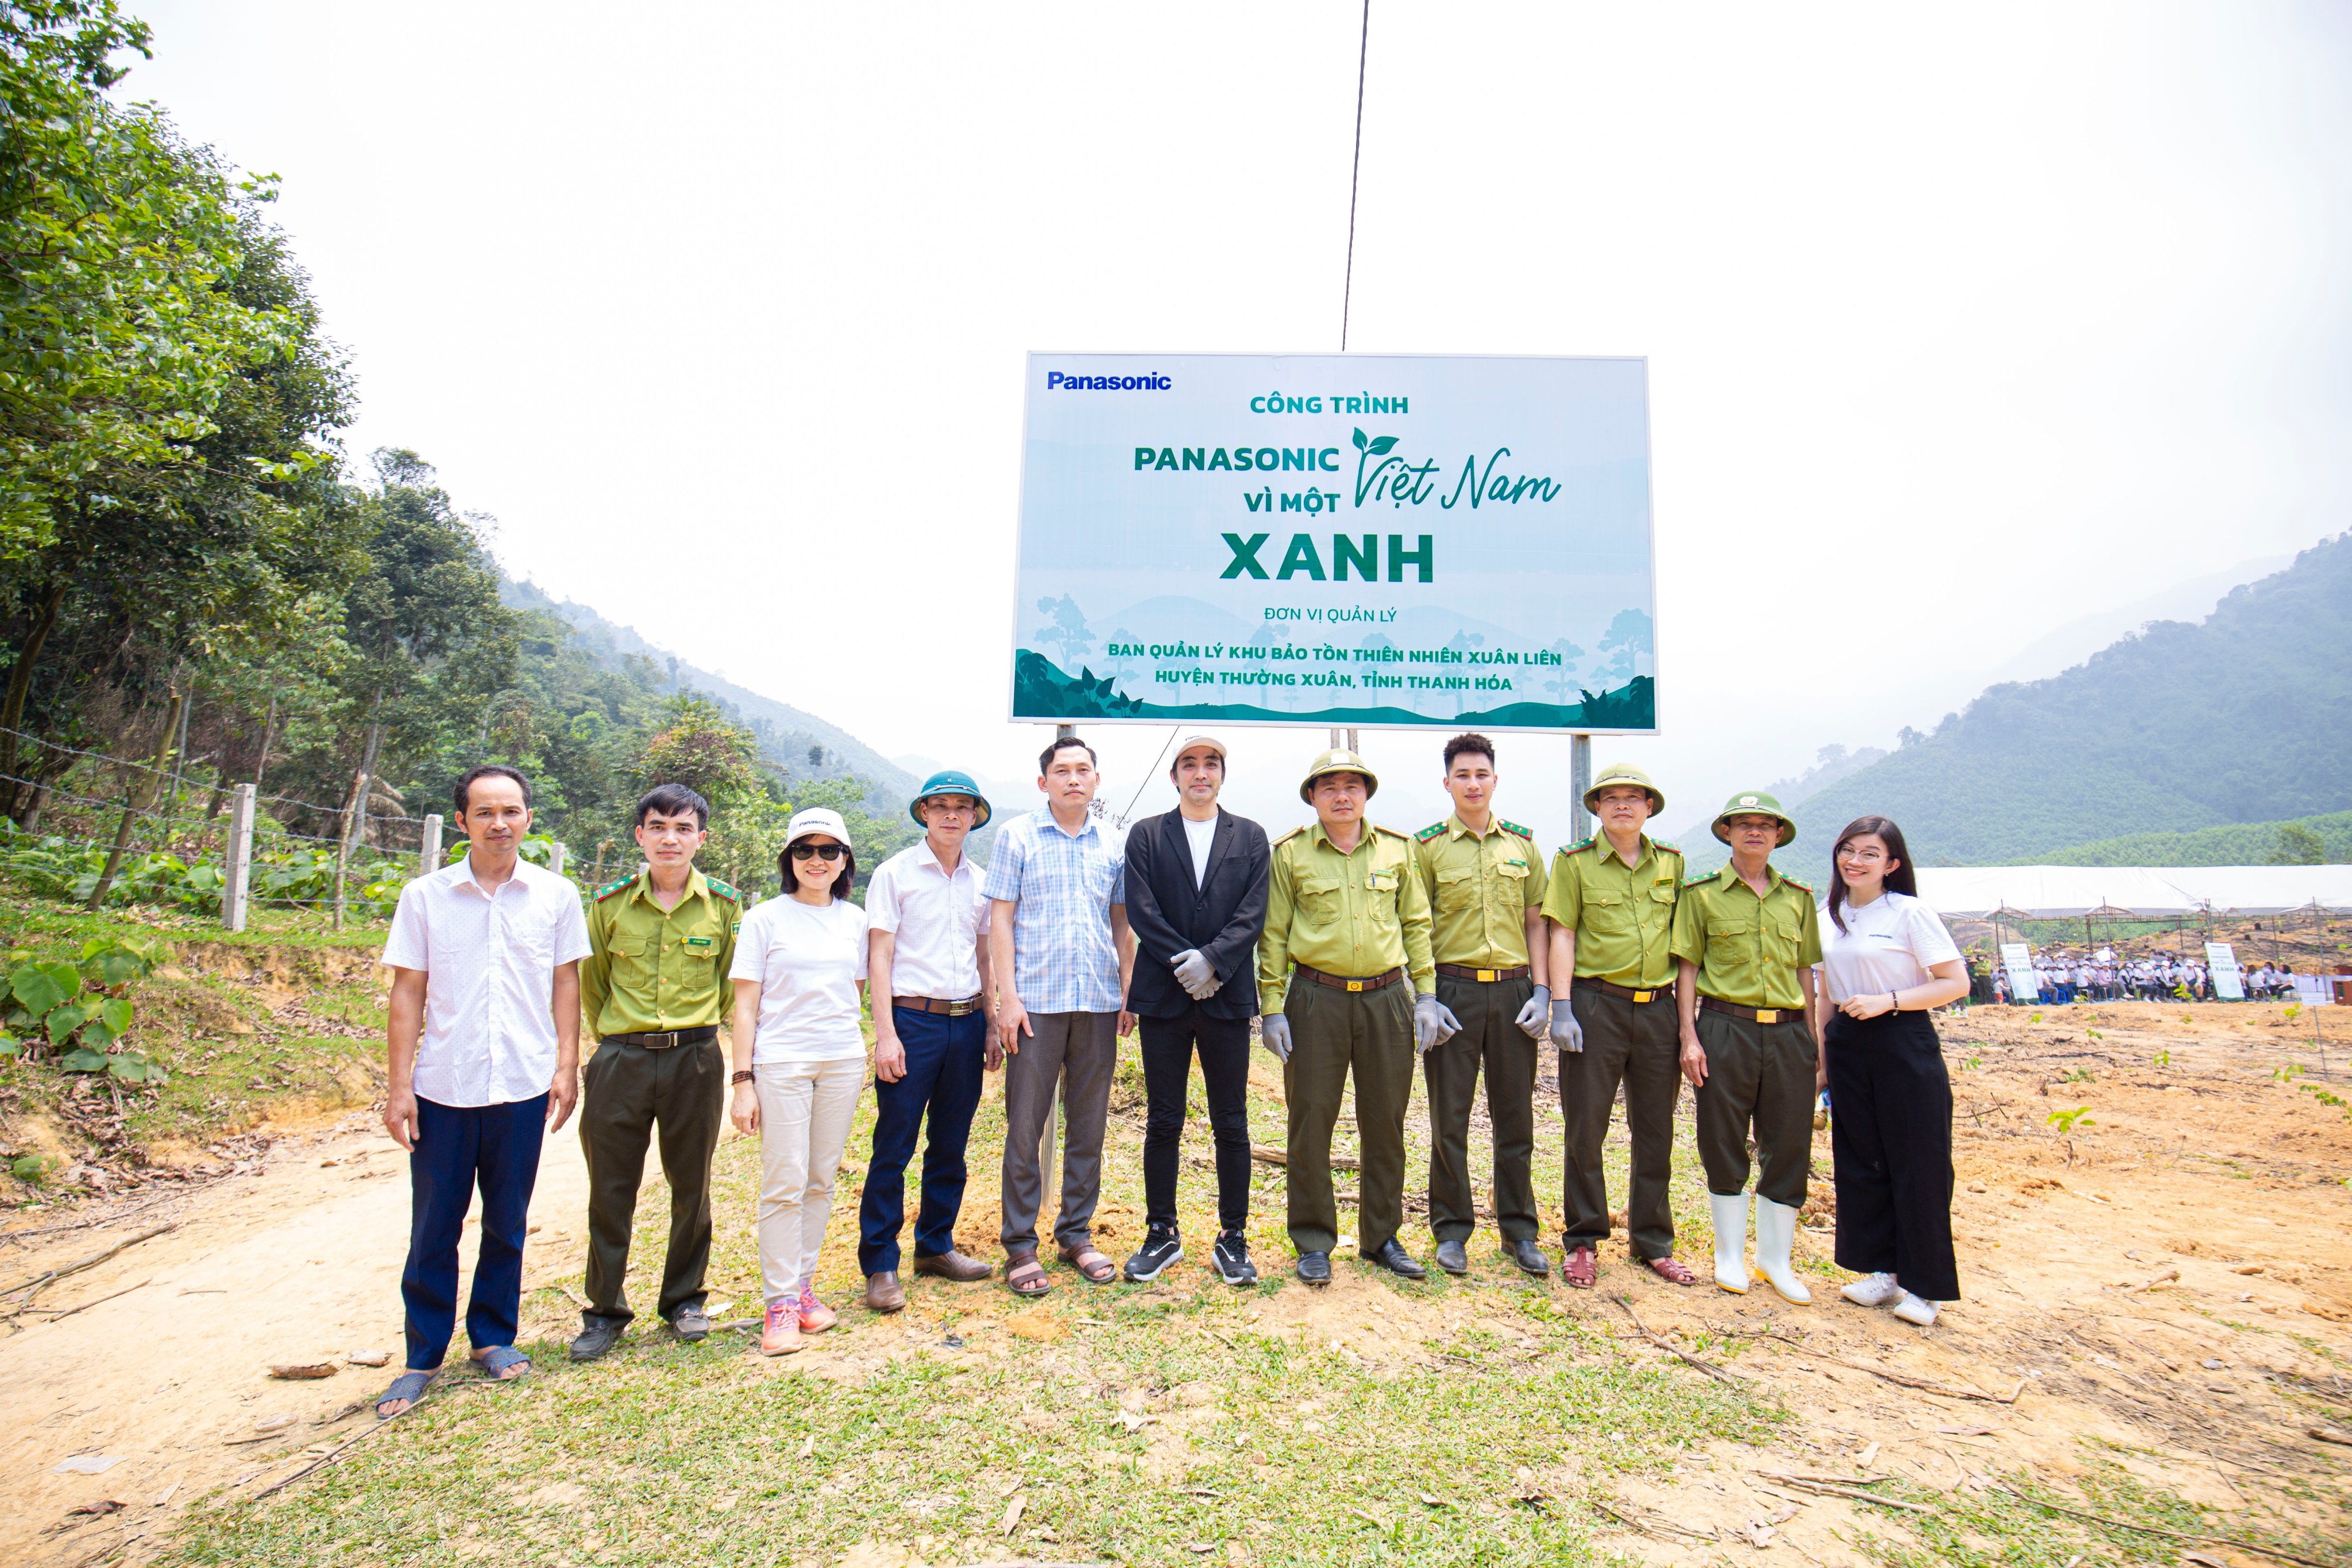 Panasonic remark its 10 years journey of Eco relay contributing “for a Green Vietnam”